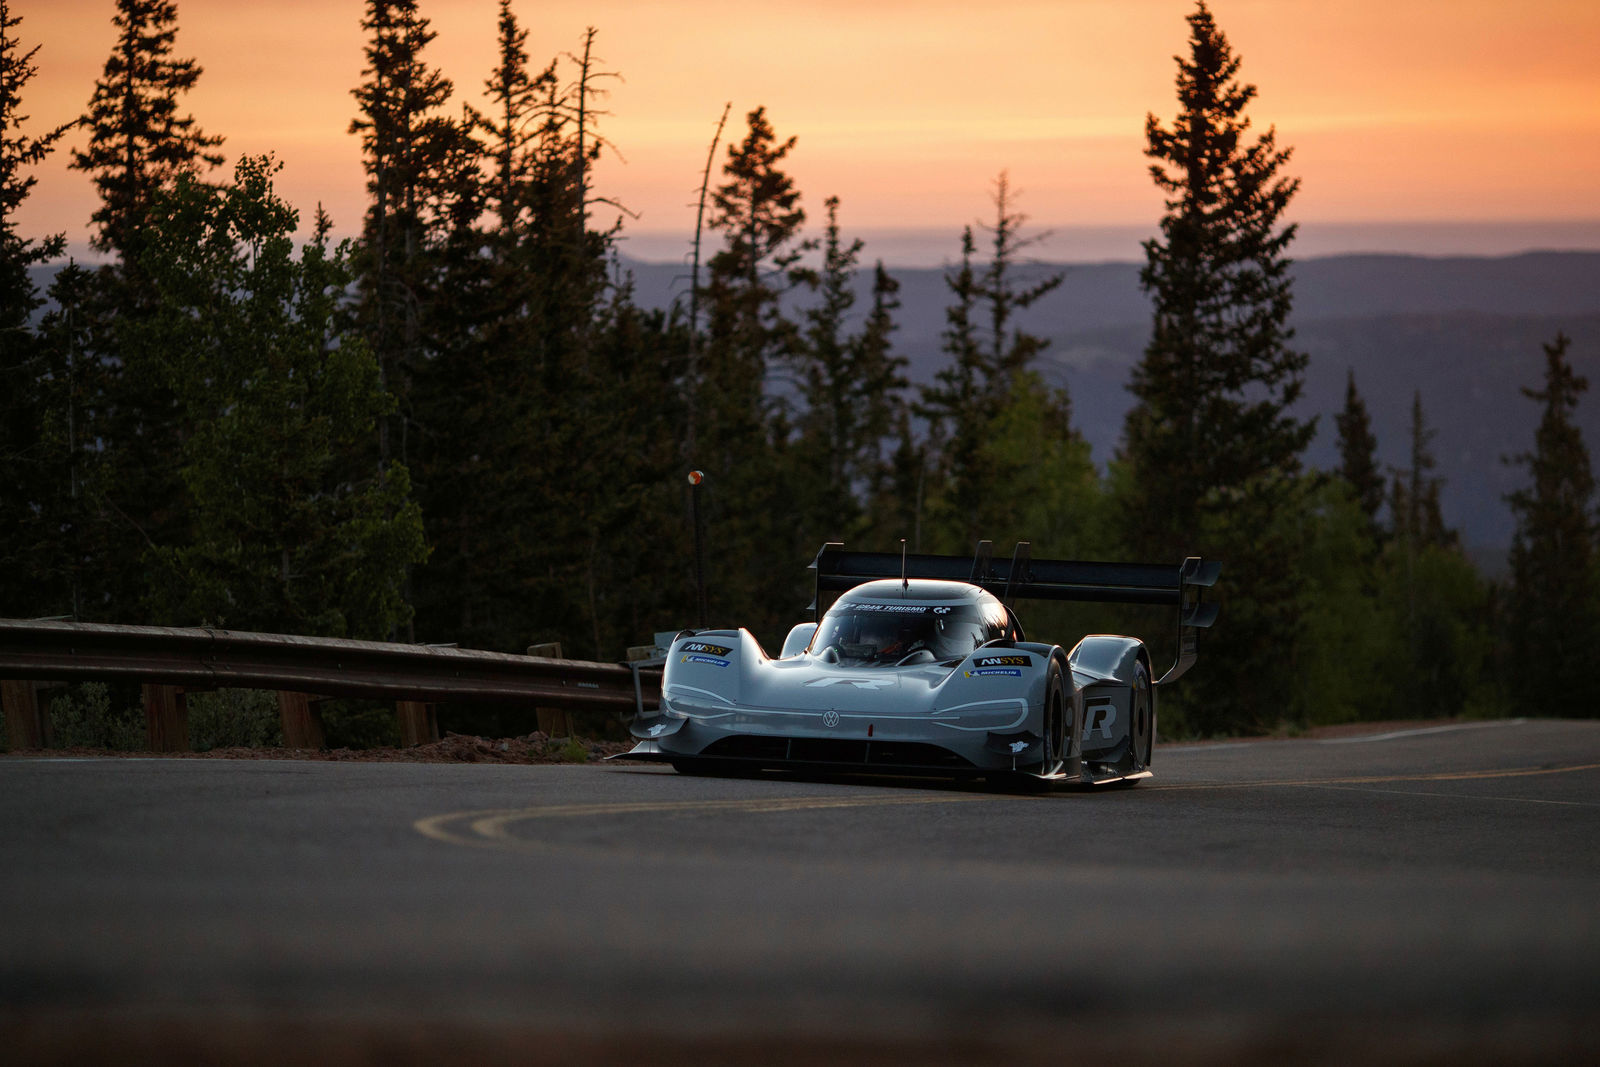 Volkswagen I. D. R Pikes Peak sets fastest time in qualifying